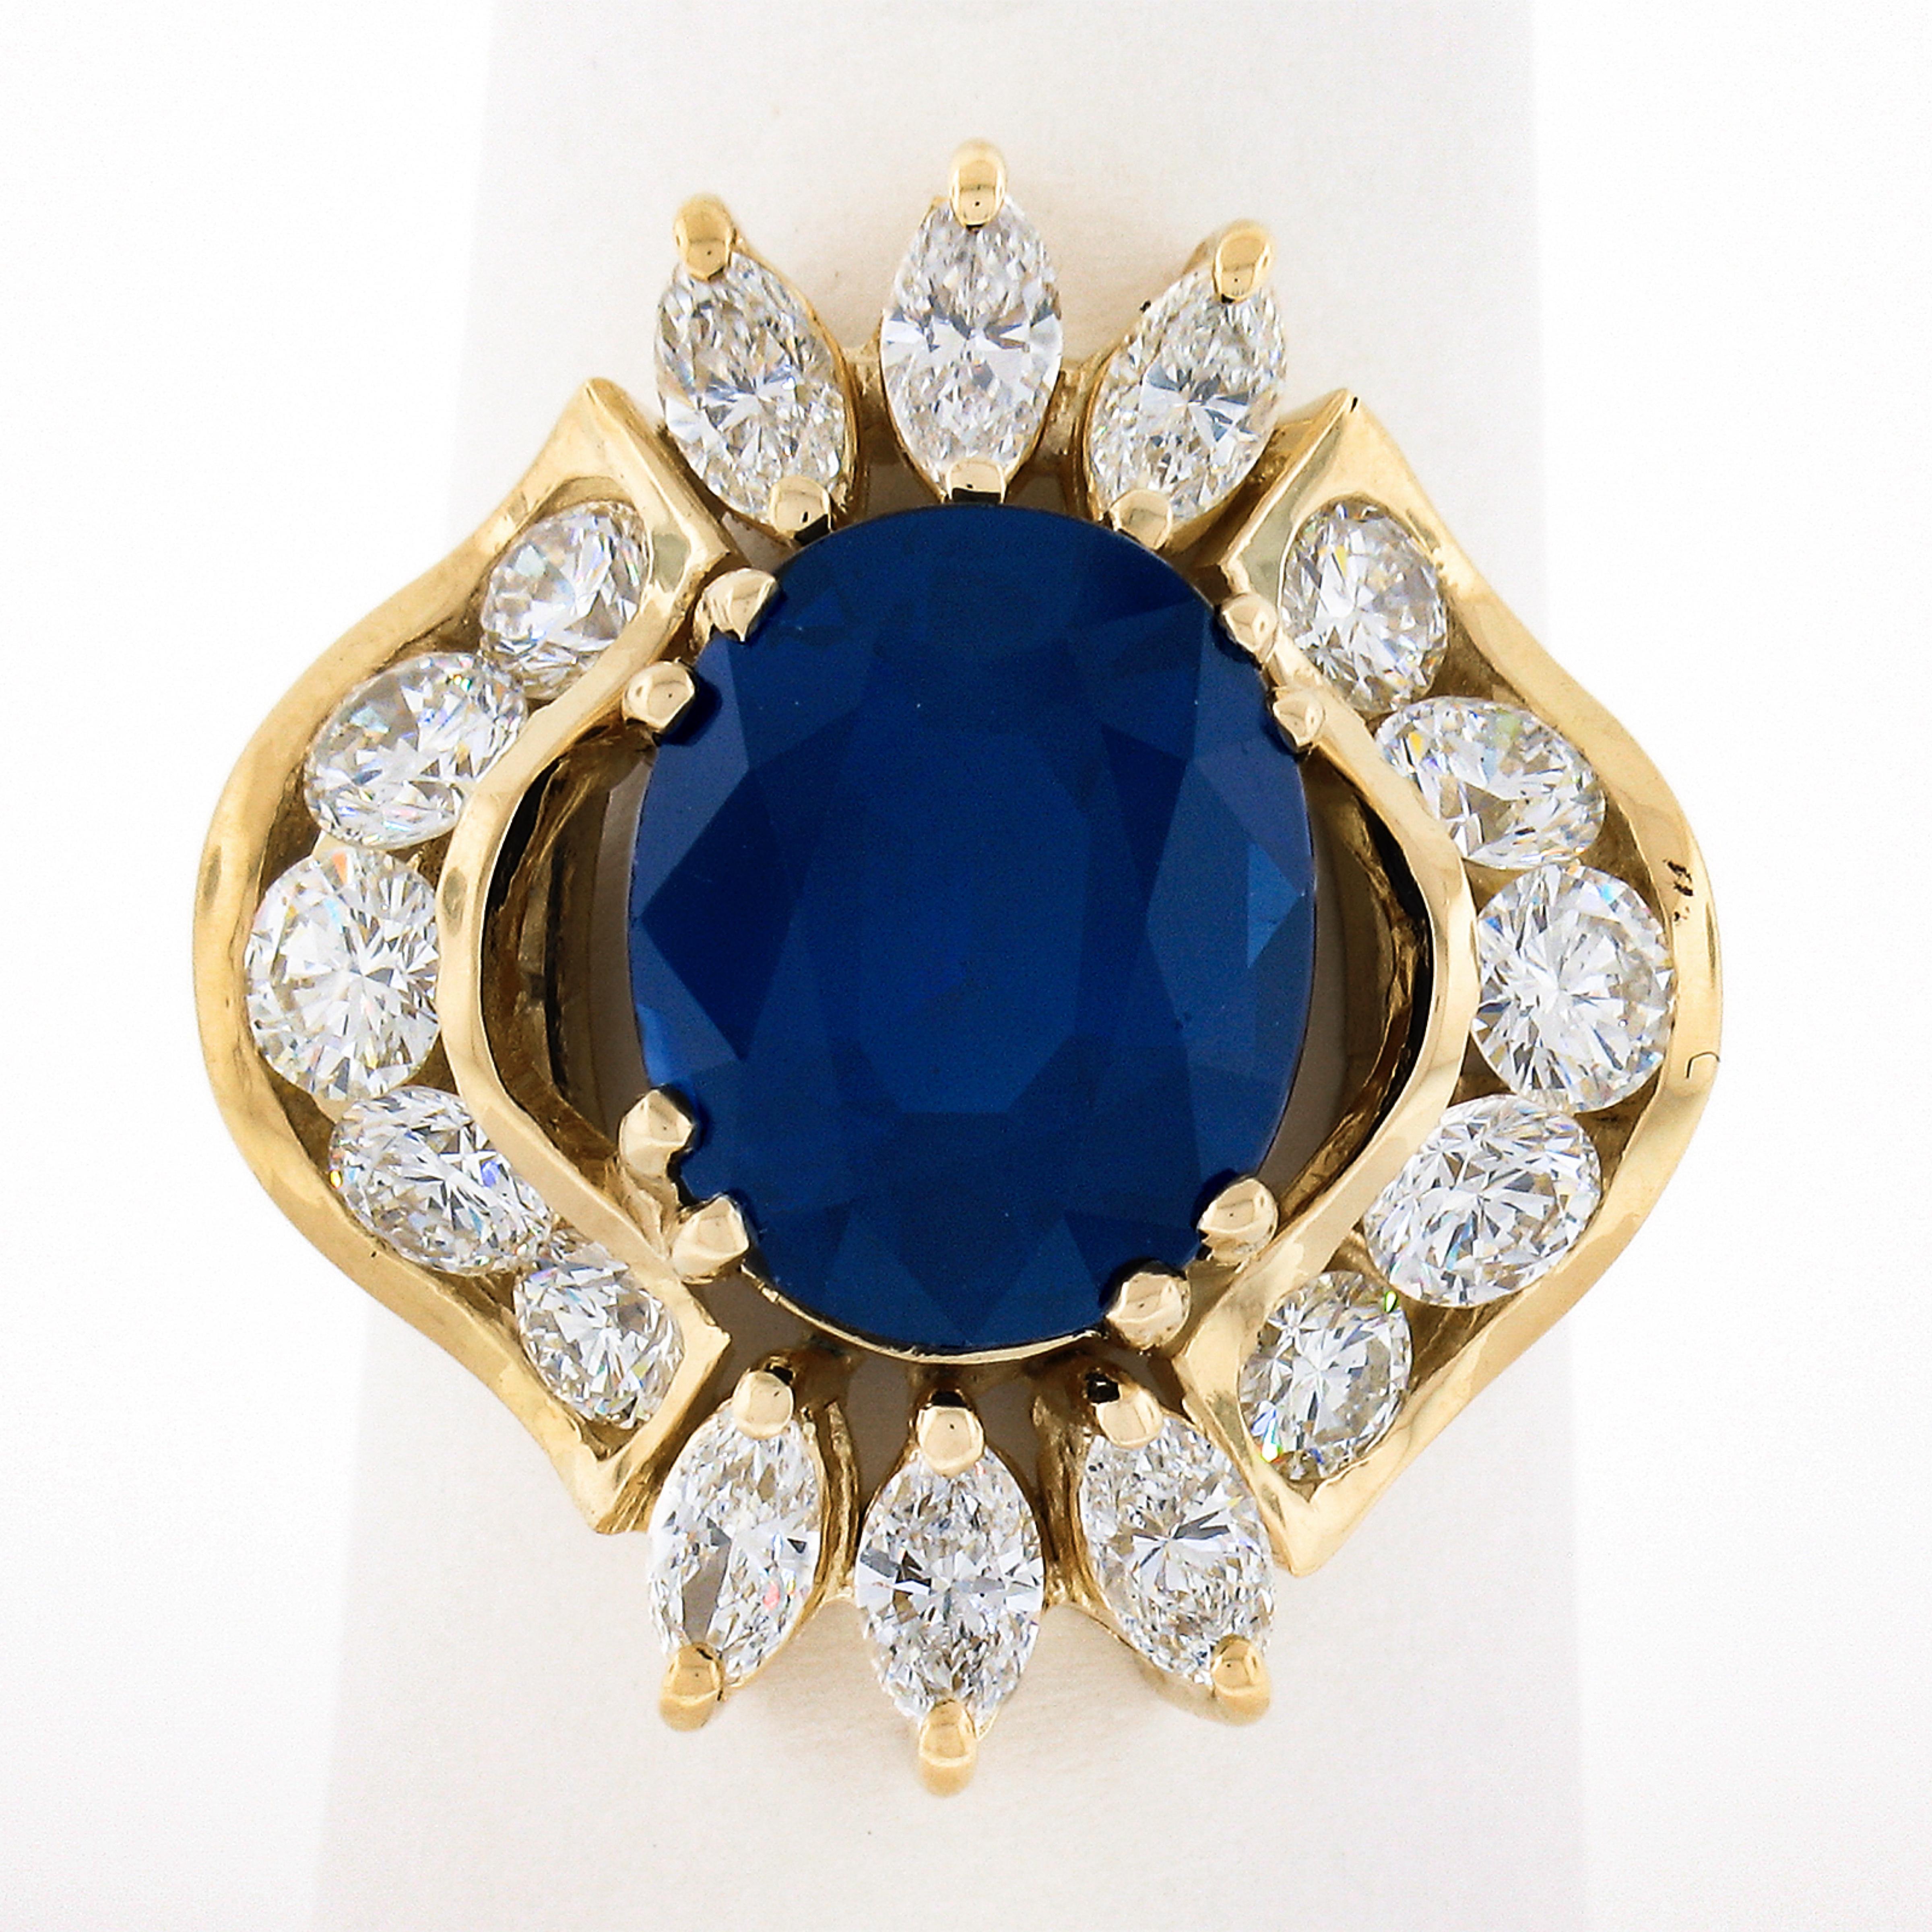 Here we have a truly breathtaking cocktail ring that was crafted from solid 18k yellow gold featuring a GIA certified, natural sapphire stone neatly dual prong set at the center of a fiery diamond drenched wavy design. The oval cut sapphire weighs